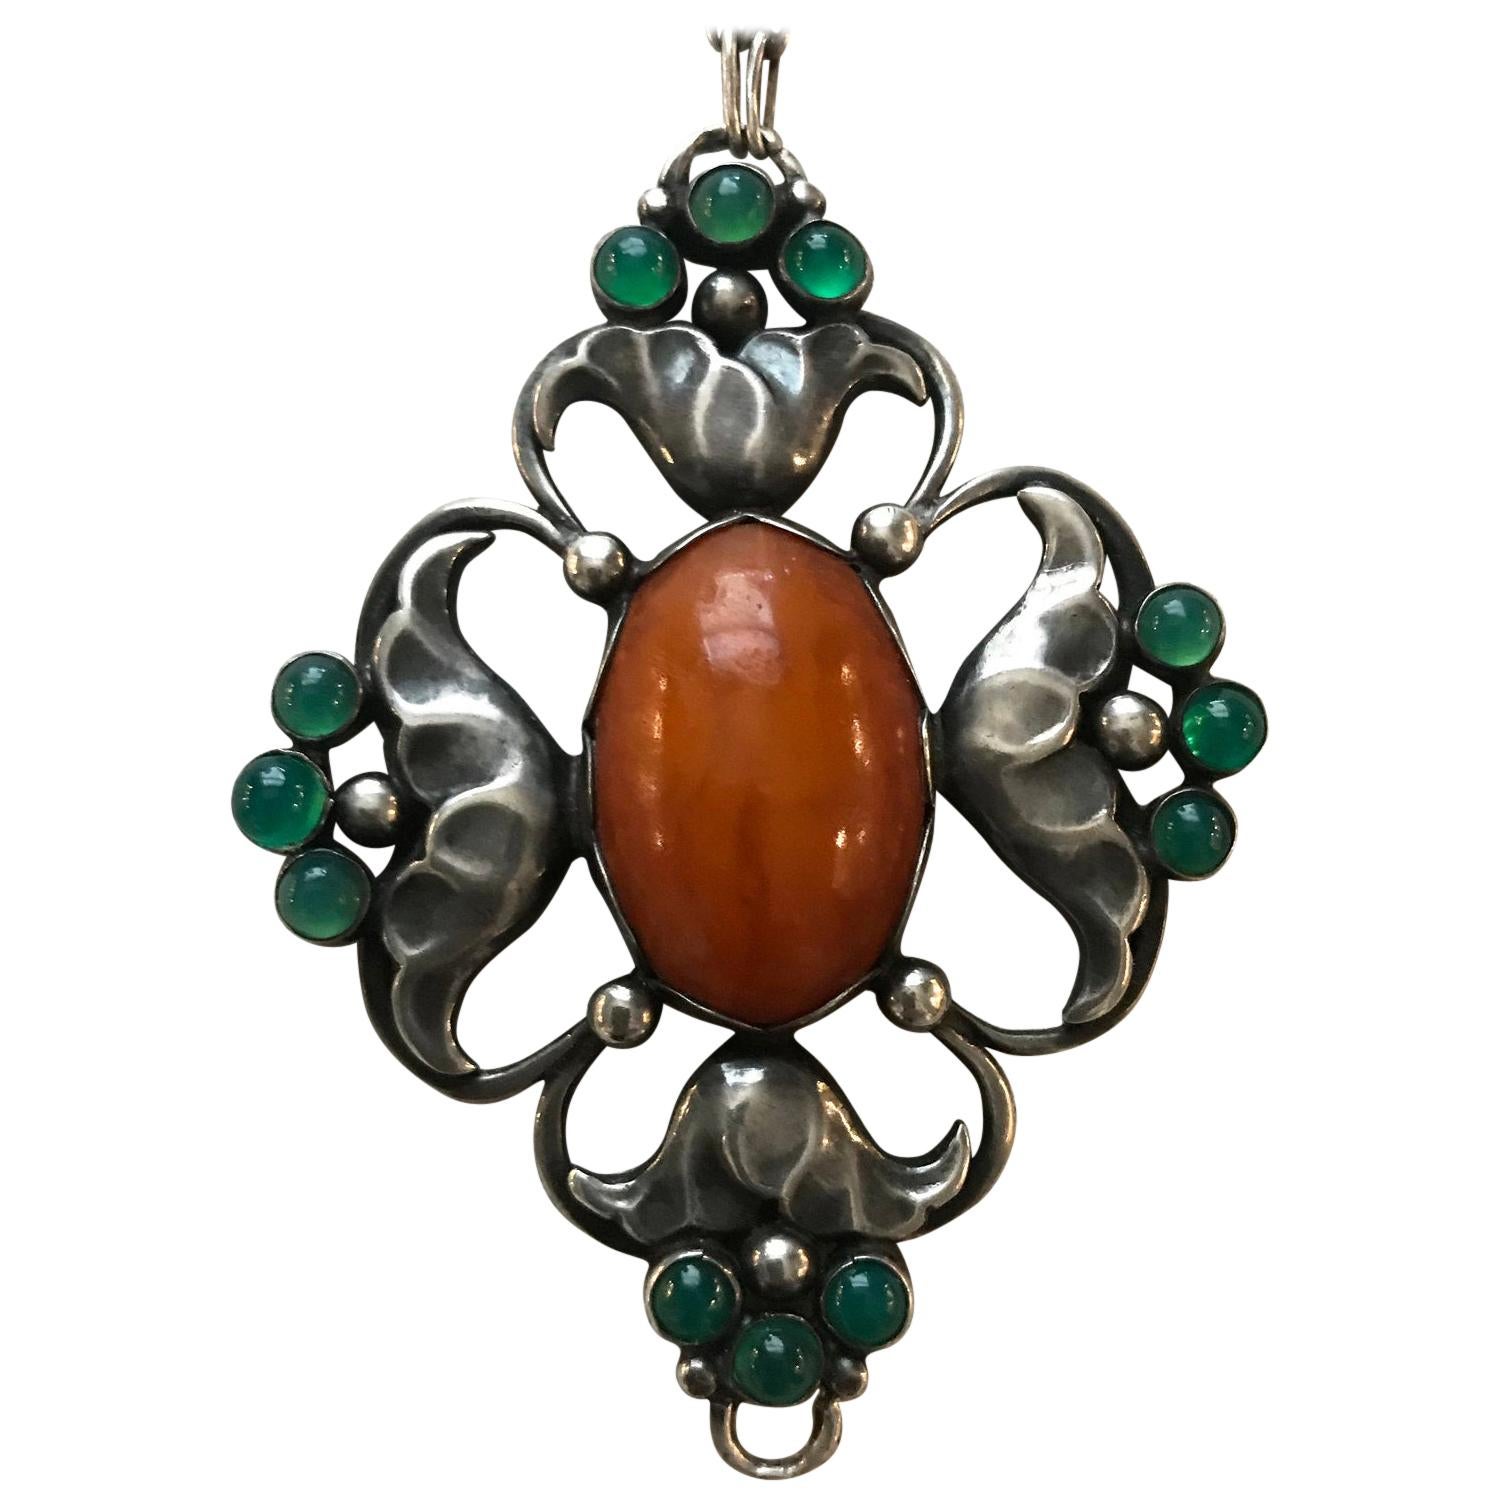 Early Georg Jensen 830 Silver Large Pendant No. 40 with Amber and Chrysoprase For Sale